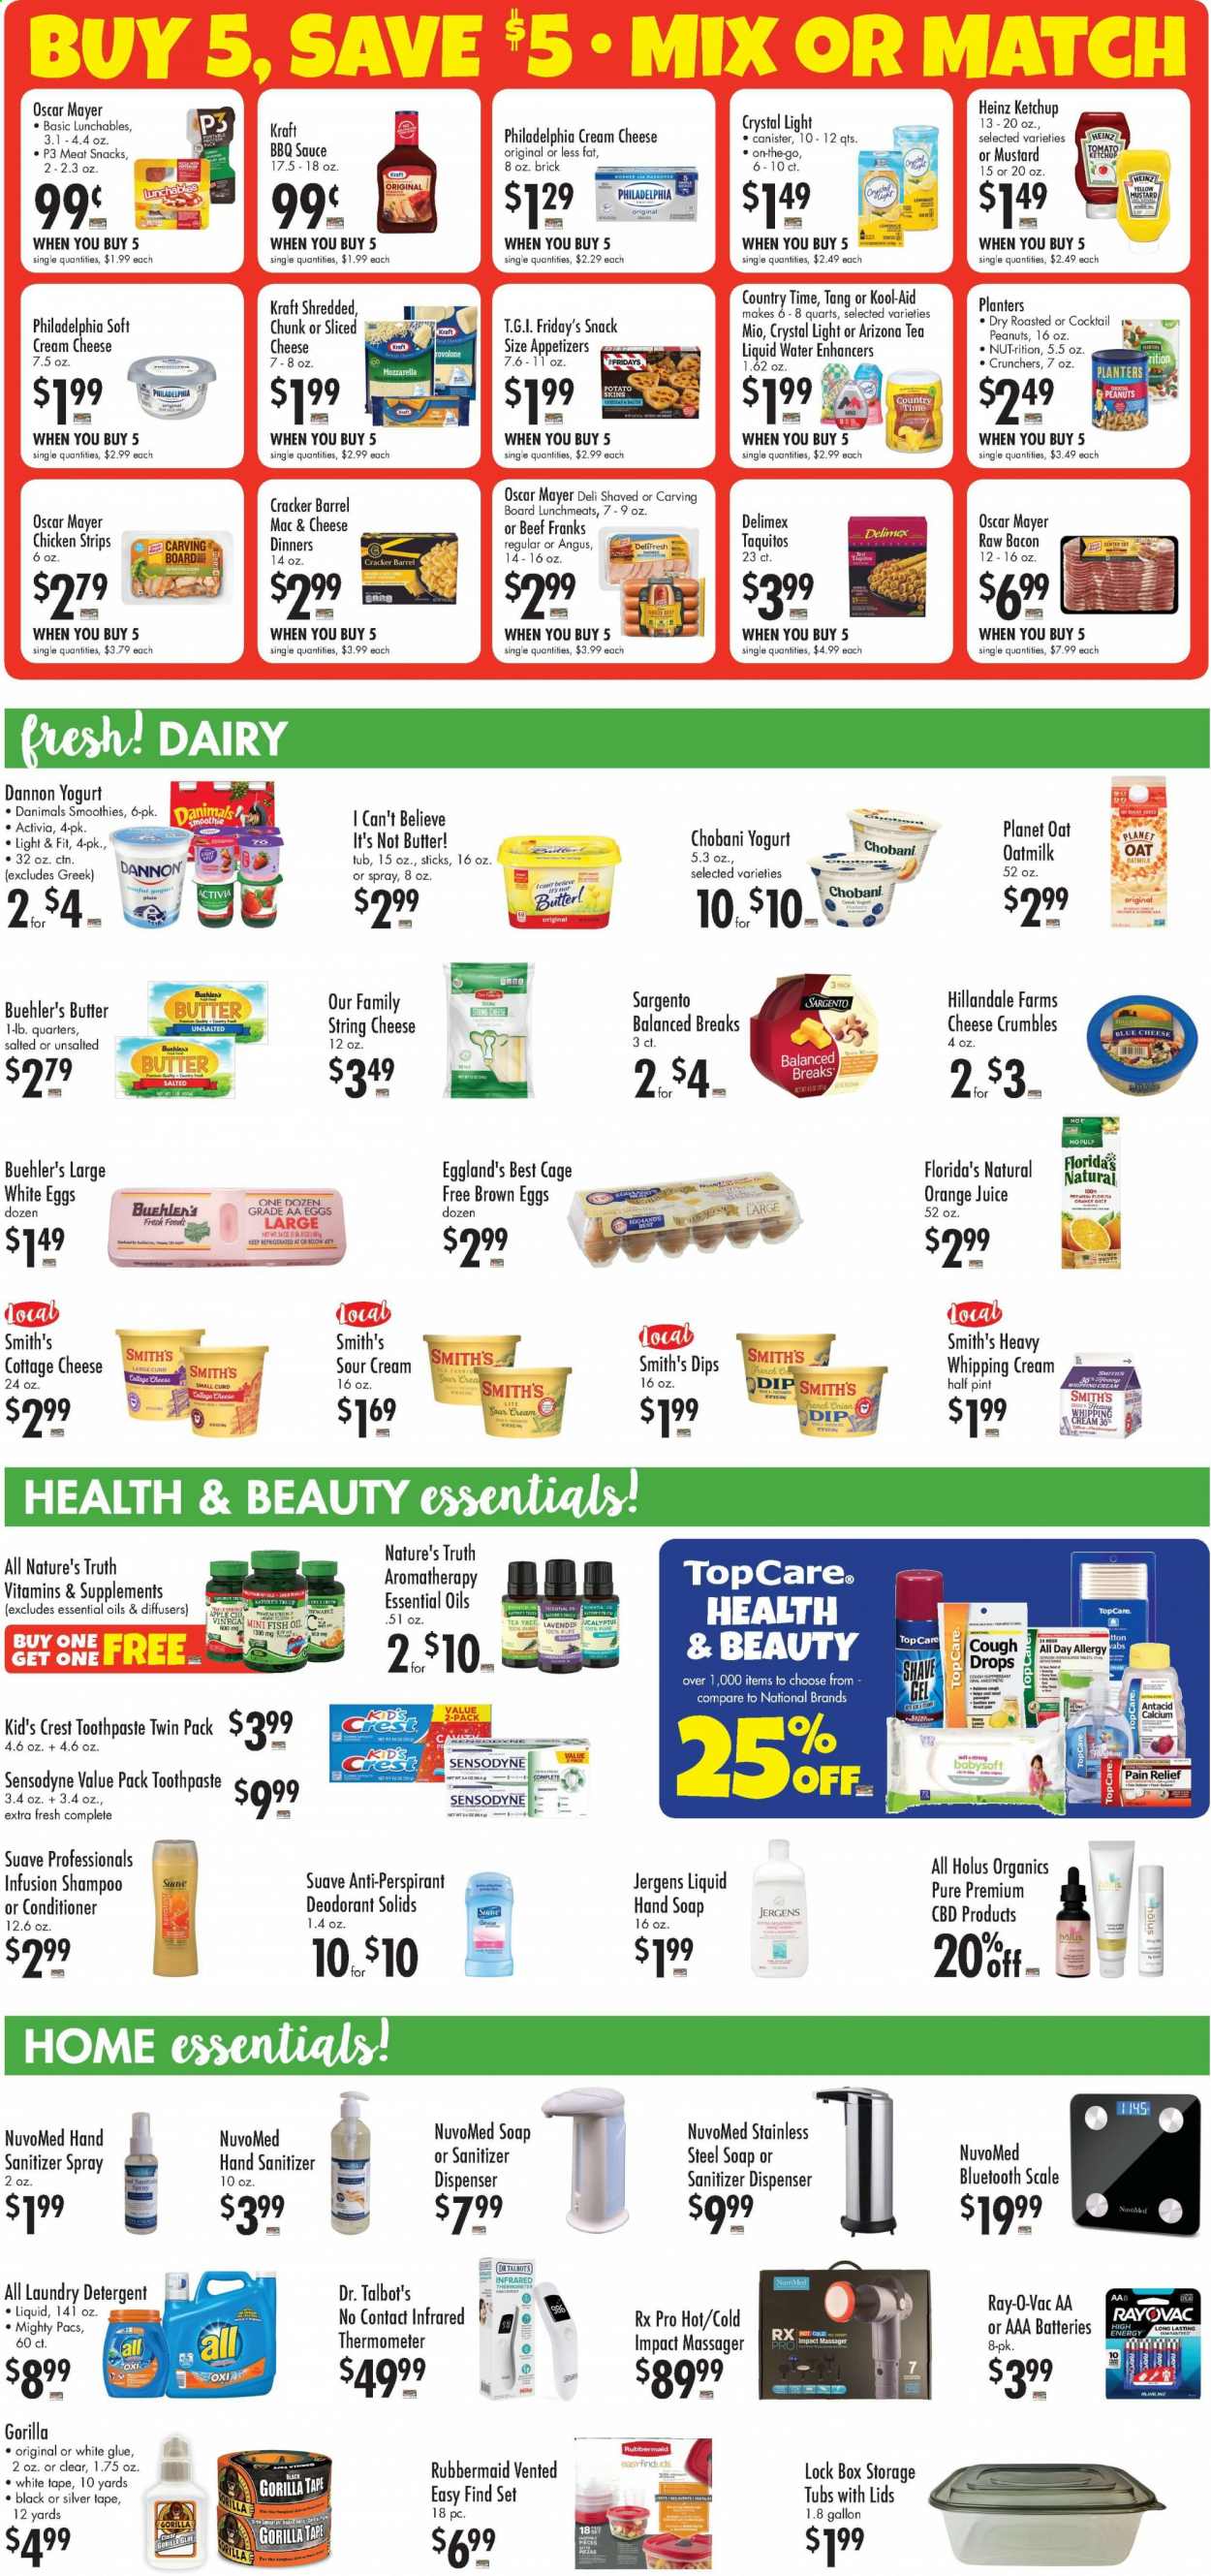 thumbnail - Buehler's Flyer - 03/03/2021 - 03/09/2021 - Sales products - cream cheese, macaroni & cheese, sauce, taquitos, Lunchables, Kraft®, bacon, Oscar Mayer, lunch meat, blue cheese, cottage cheese, mozzarella, sliced cheese, string cheese, Philadelphia, cheddar, cheese crumbles, Sargento, greek yoghurt, yoghurt, Activia, Chobani, Dannon, Danimals, oat milk, eggs, cage free eggs, butter, I Can't Believe It's Not Butter, sour cream, whipping cream, dip, strips, chicken strips, crackers, Florida's Natural, snack, Smith's, oats, Heinz, BBQ sauce, mustard, ketchup, fish oil, peanuts, Planters, lemonade, orange juice, juice, AriZona, Country Time, smoothie, tea, beef meat, diffuser, essential oils, AAA batteries, tea tree, thermometer, Crest. Page 5.